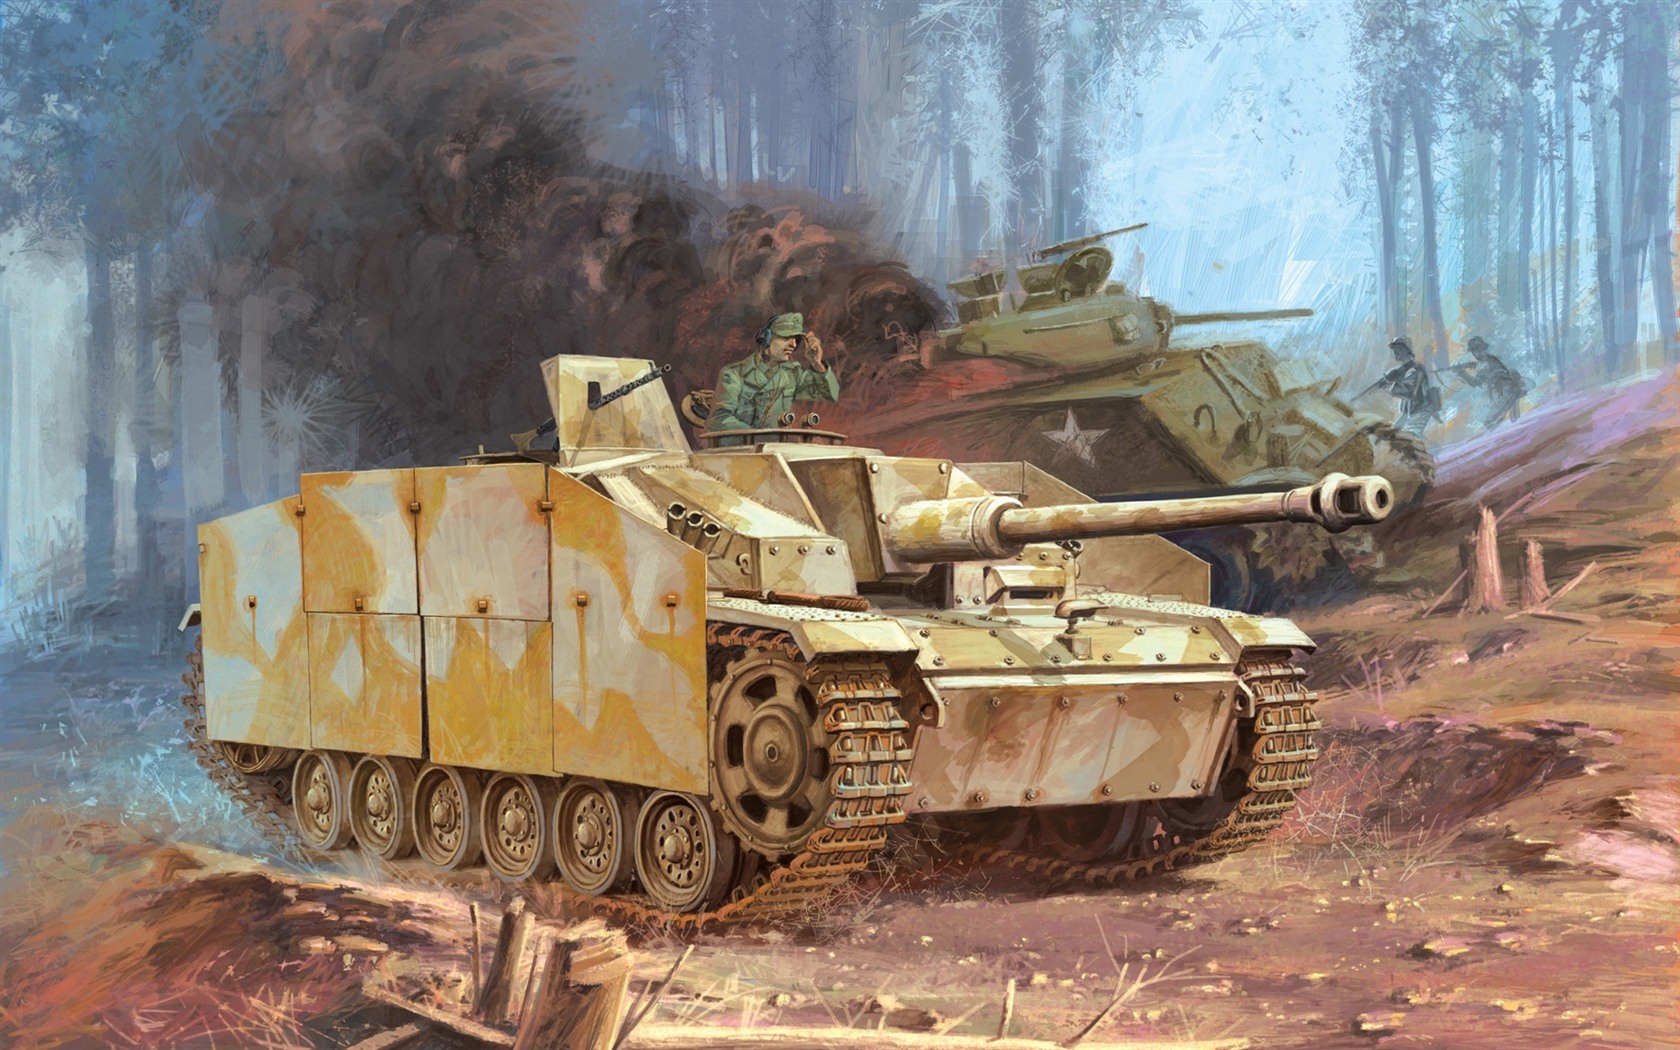 Military tanks, armored HD painting wallpapers #3 - 1680x1050